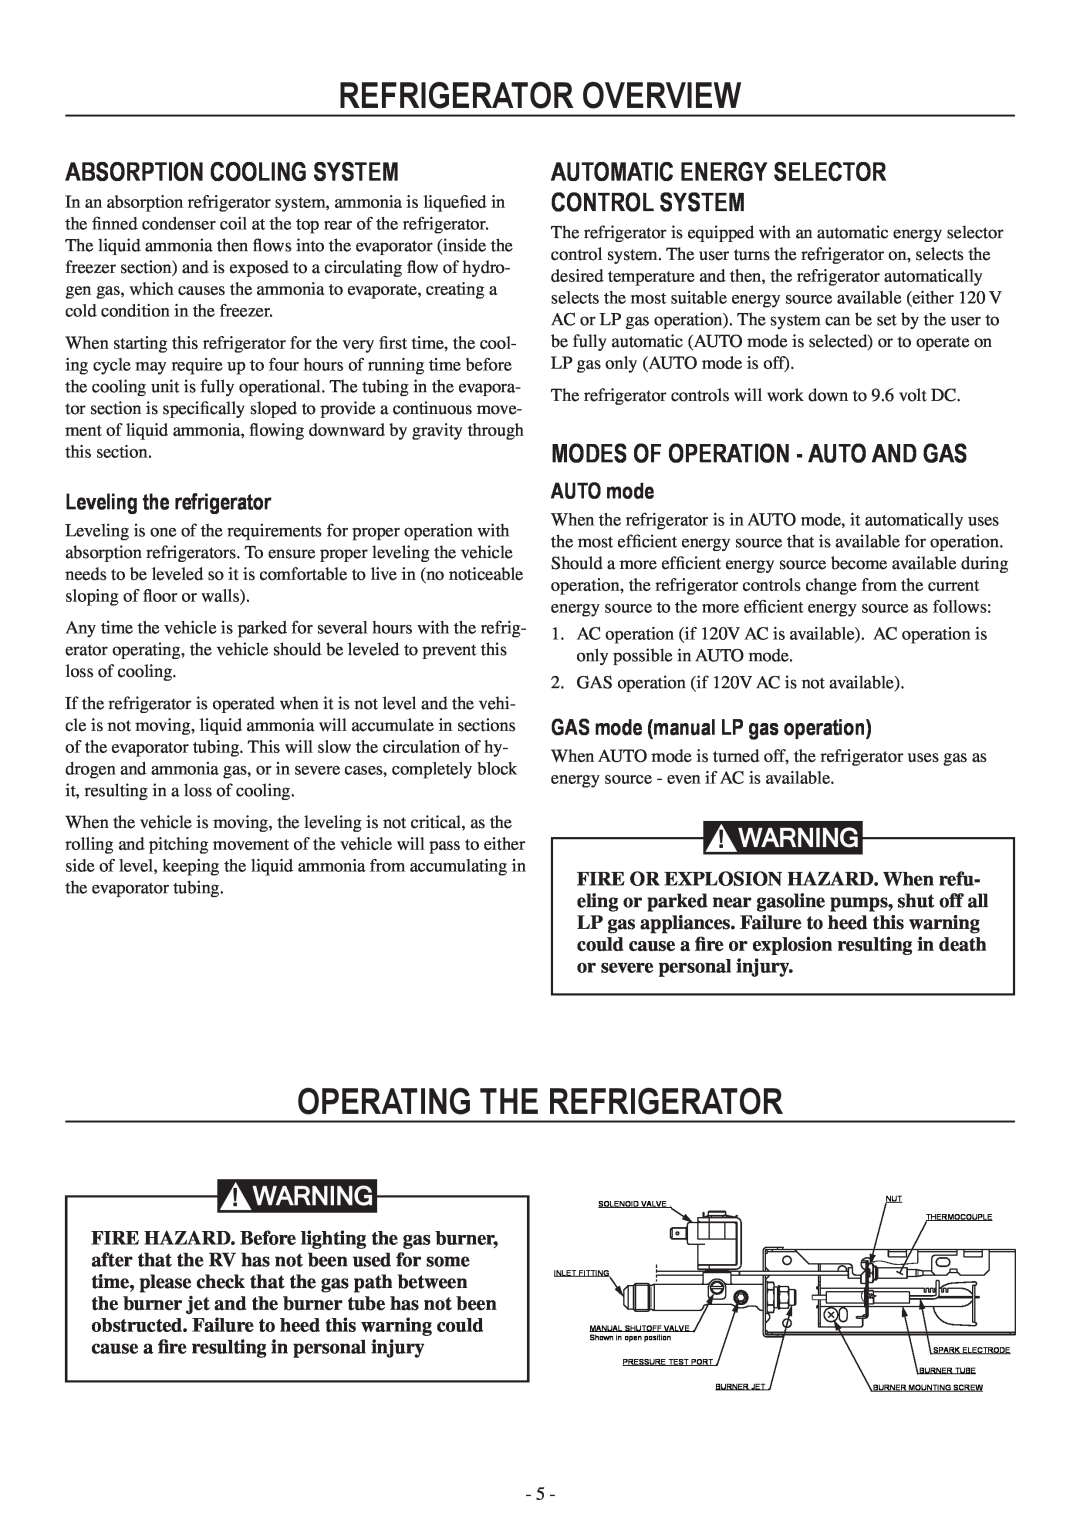 Dometic RM3962 user manual operating the refrigerator, refrigerator overview, Absorption cooling system 